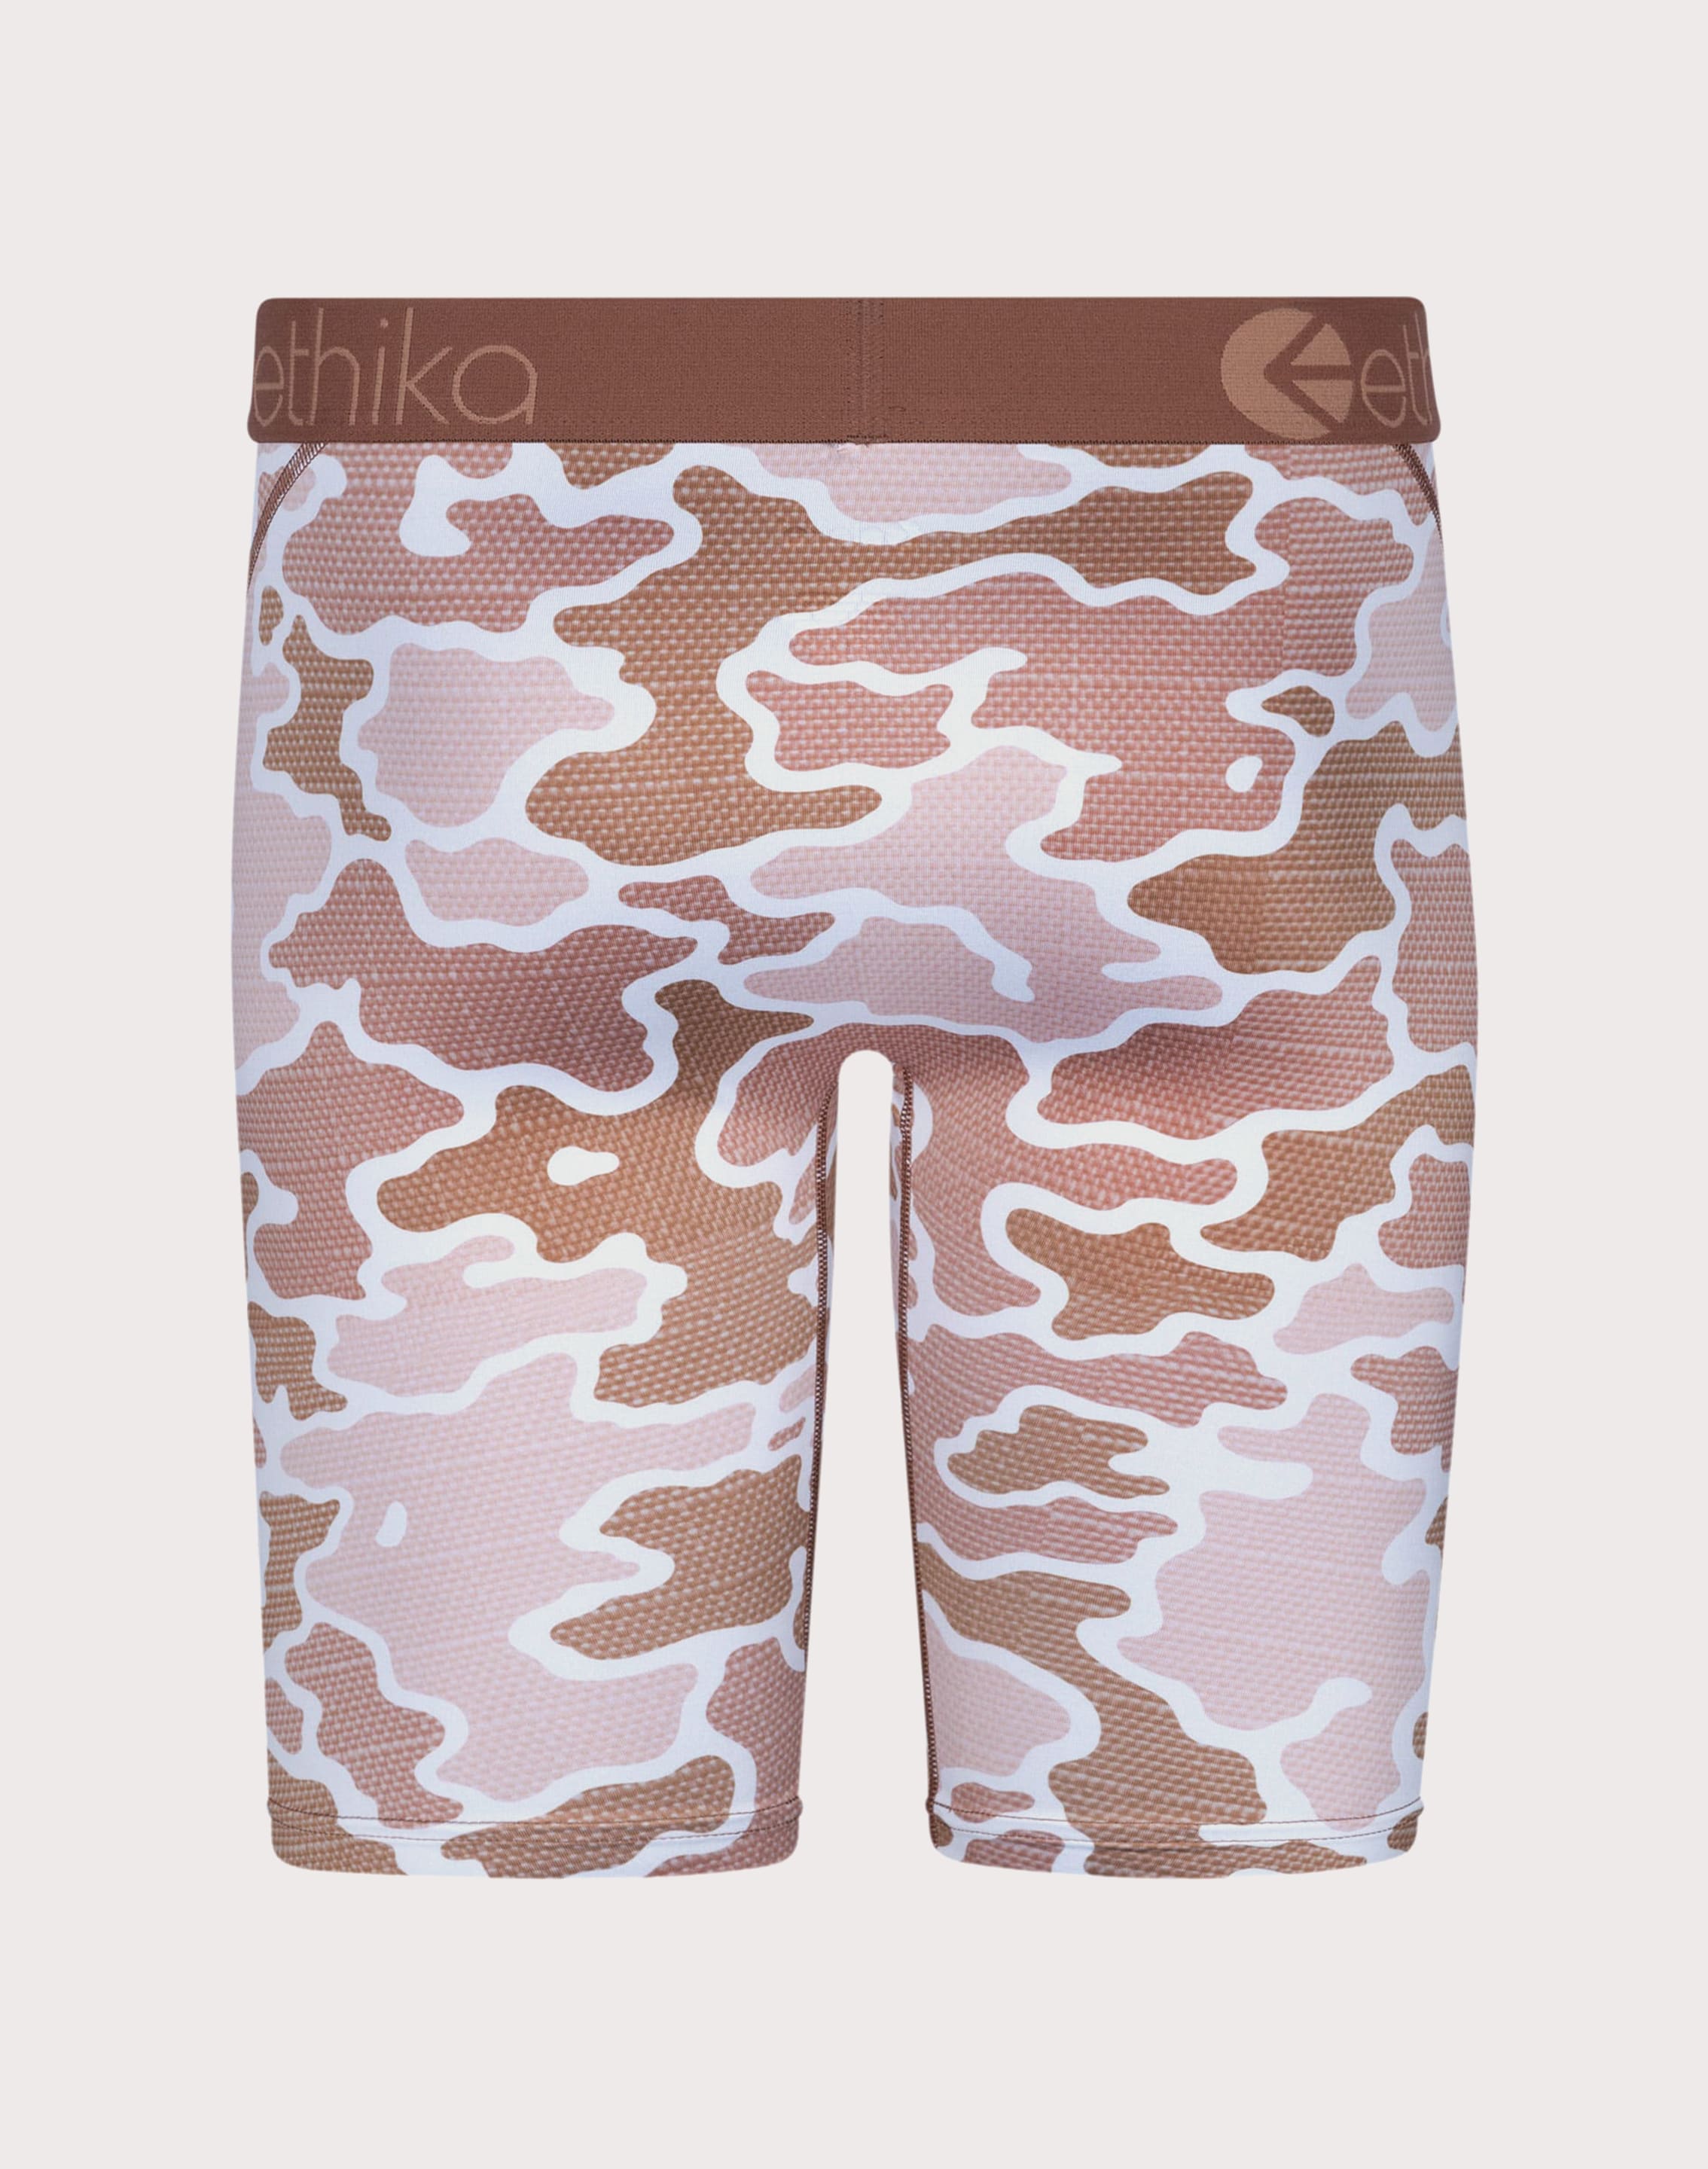 Ethika Mens Mid Boxer Briefs  Bomber Camo Drip, Bomber Camo Drip, Small :  : Clothing, Shoes & Accessories